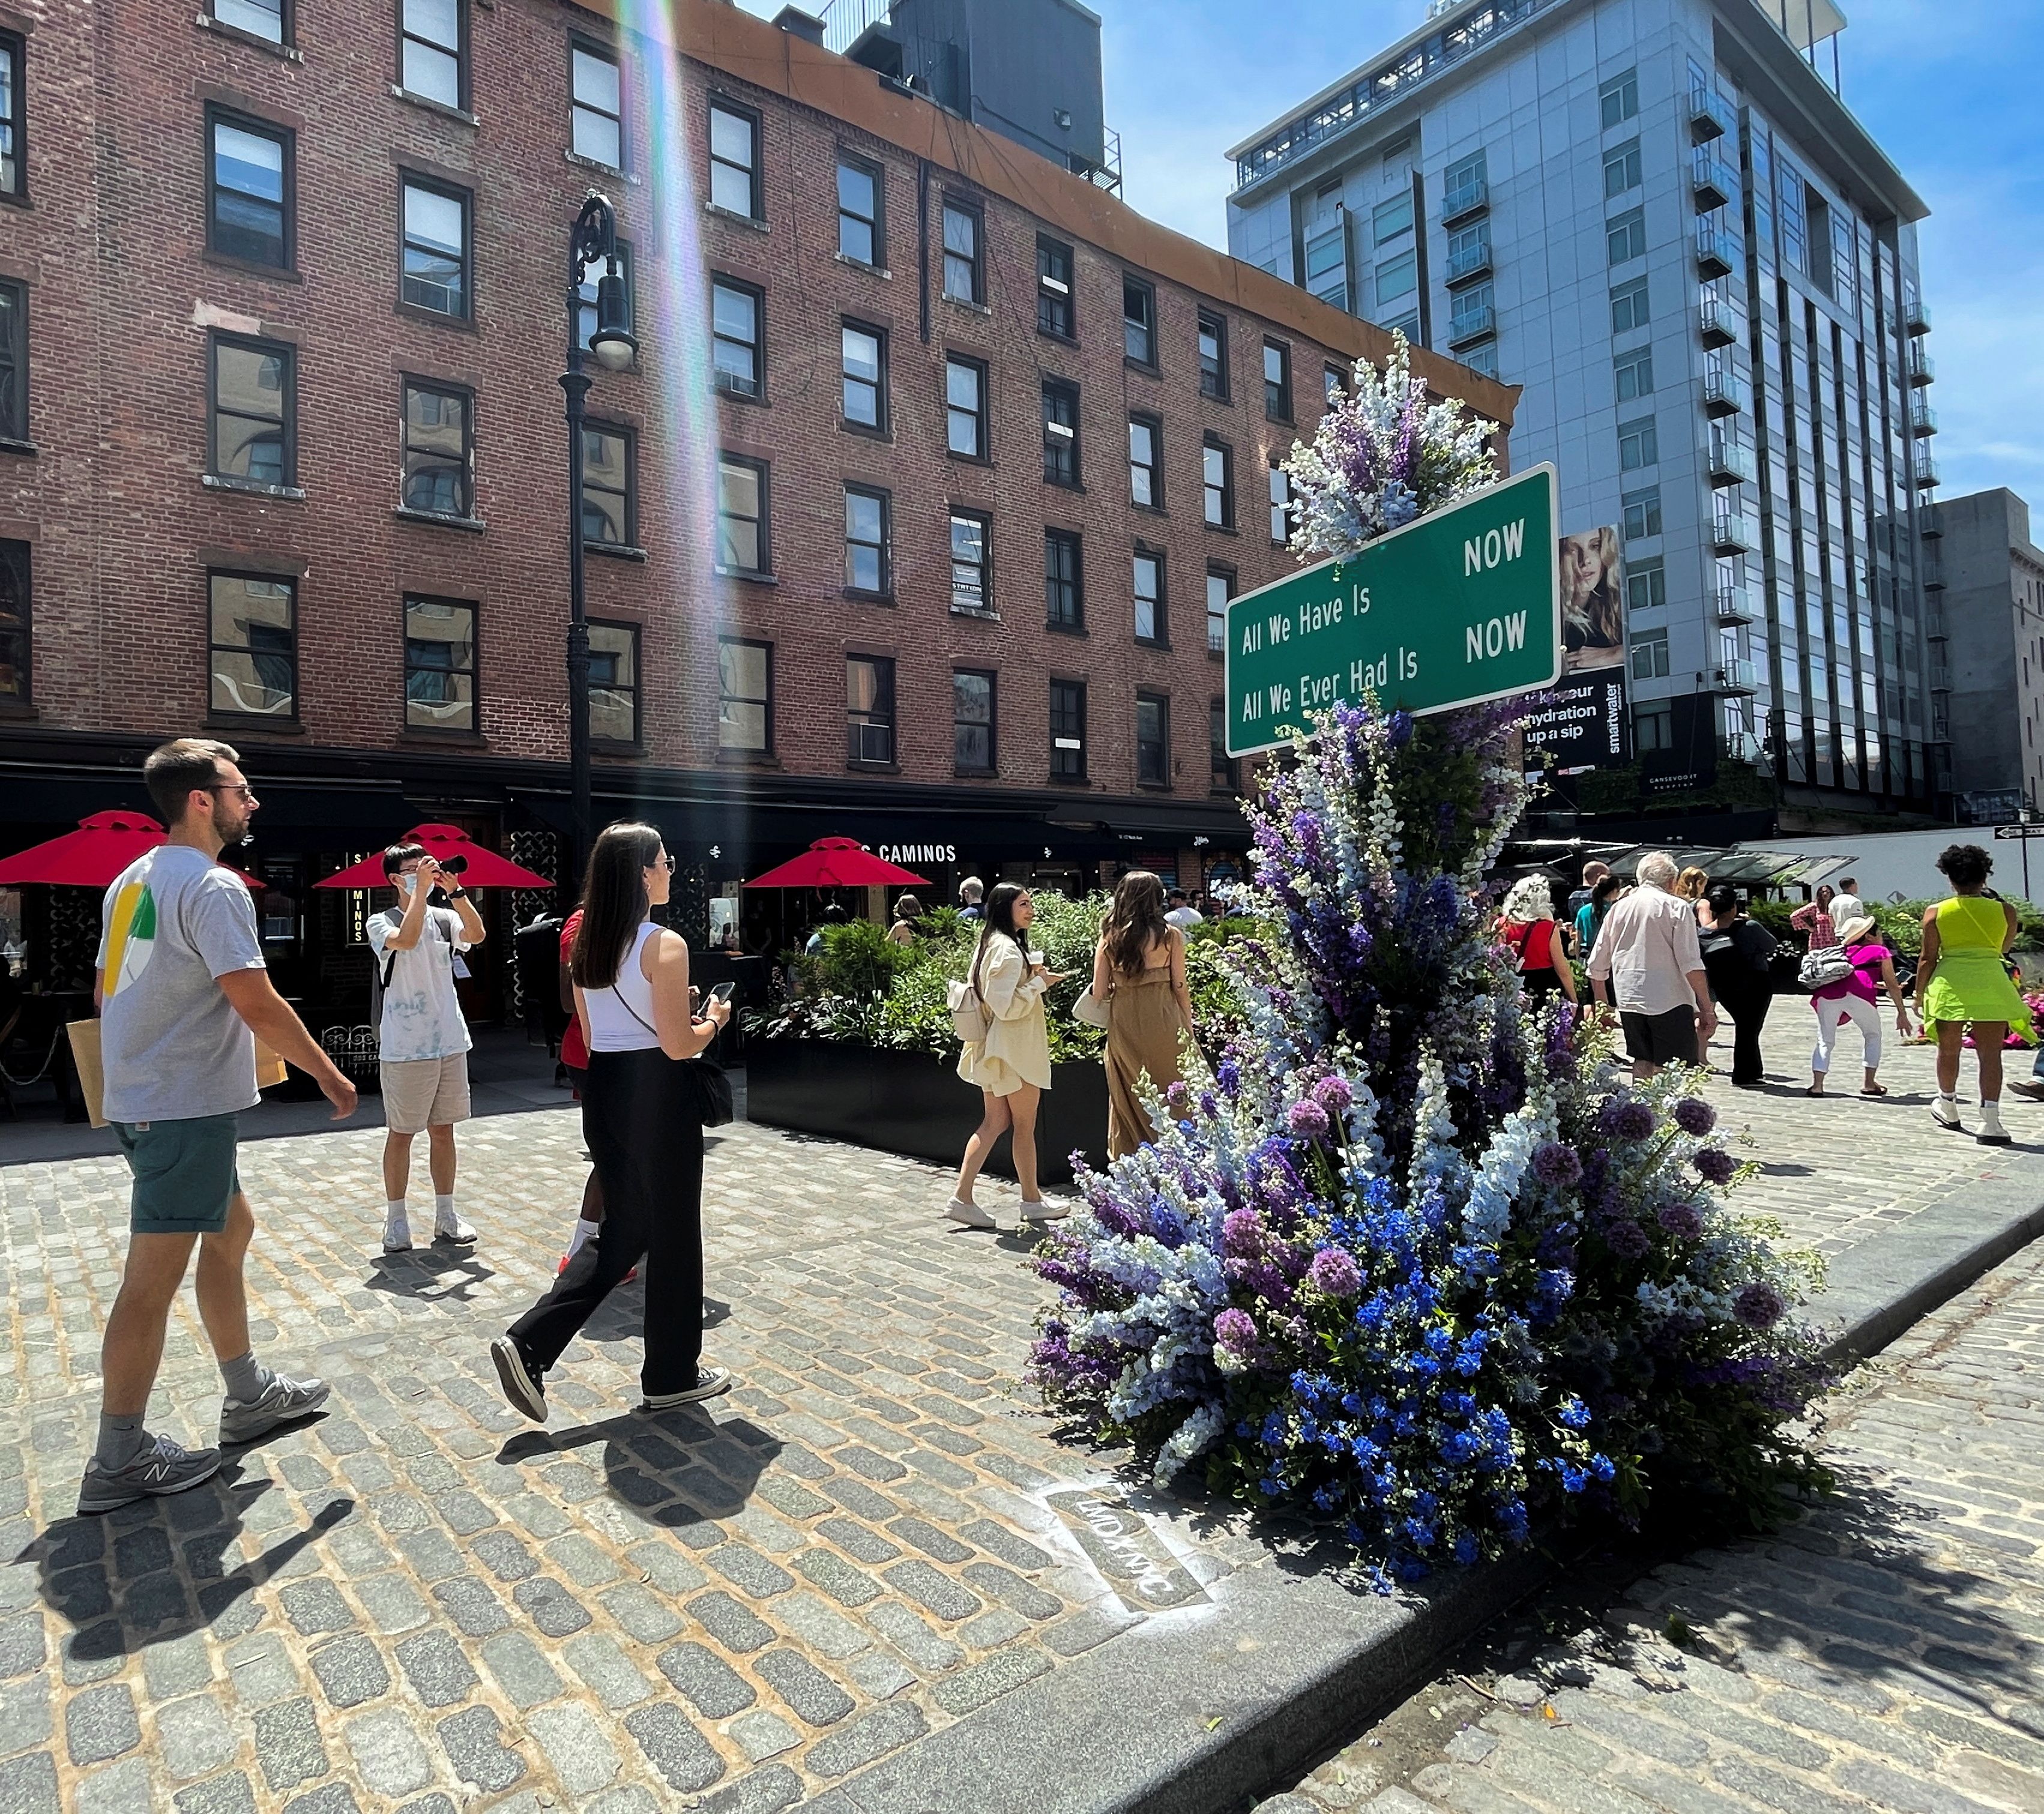 New York's Meatpacking District is immersed in flowers for the L.E.A.F Festival of Flowers